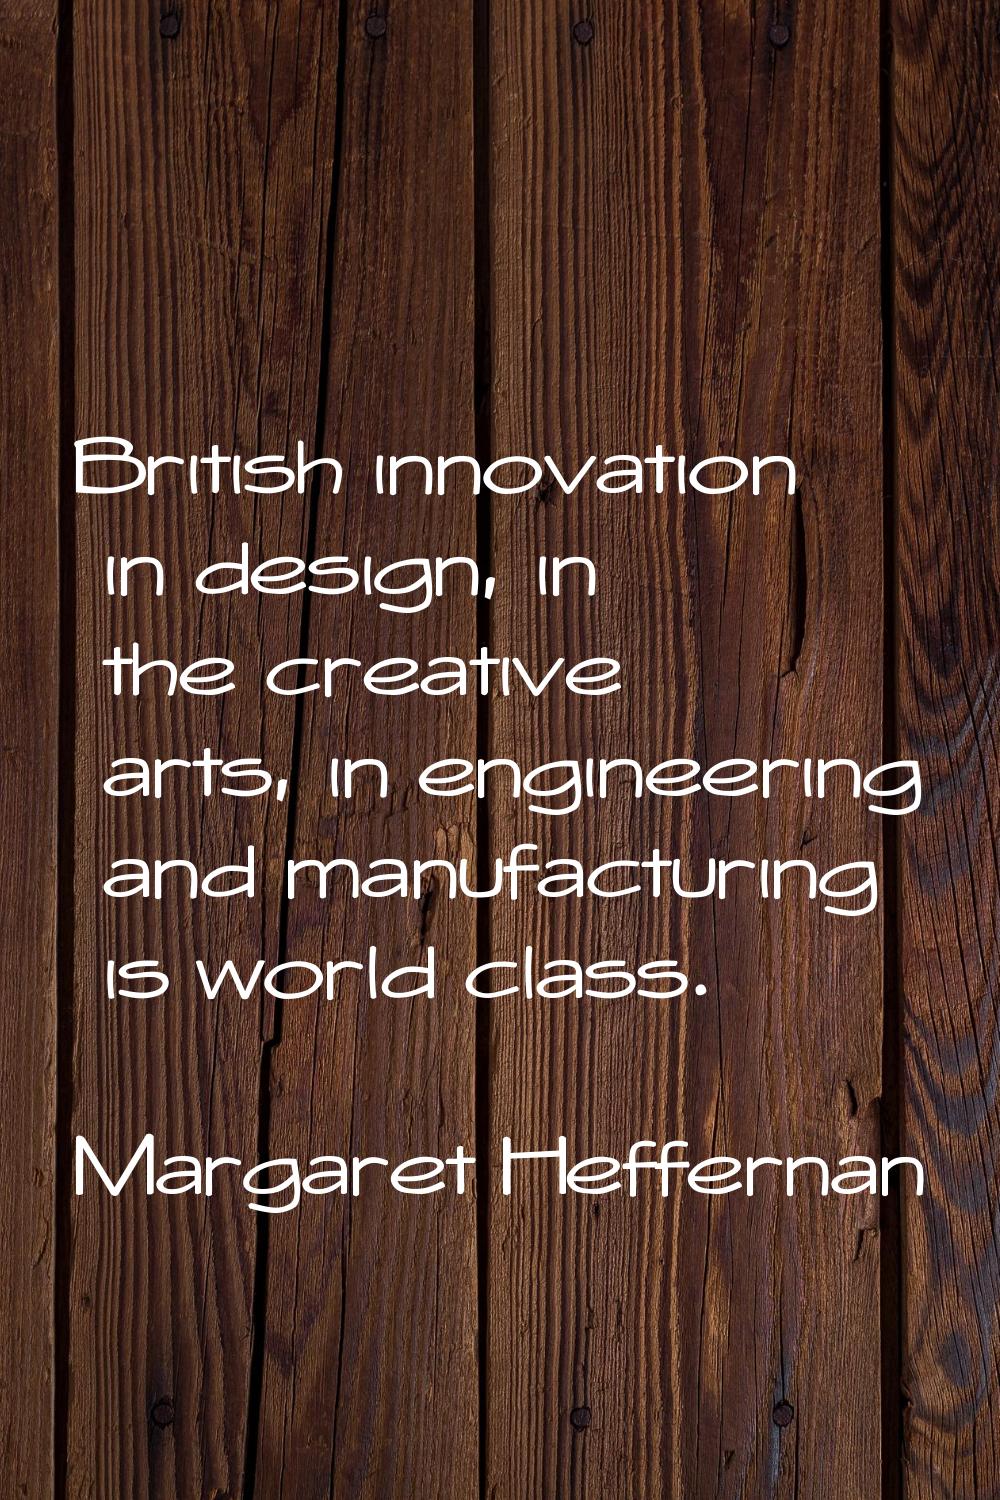 British innovation in design, in the creative arts, in engineering and manufacturing is world class